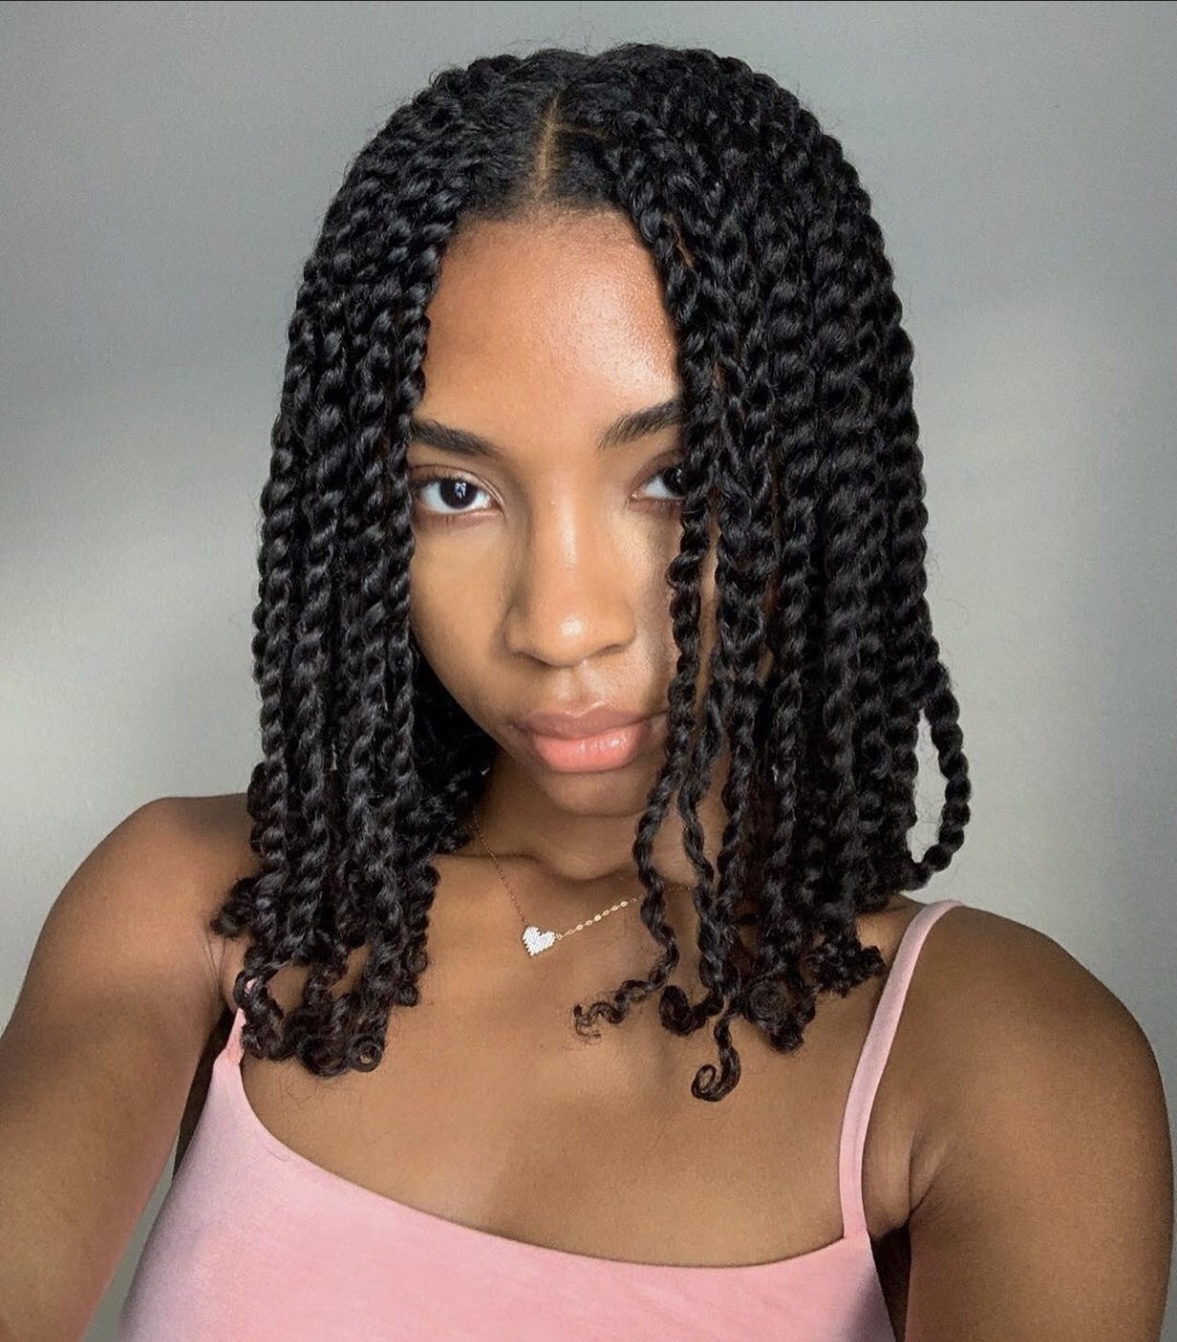 Mini twists on natural hair. No extensions added. Mini twists are